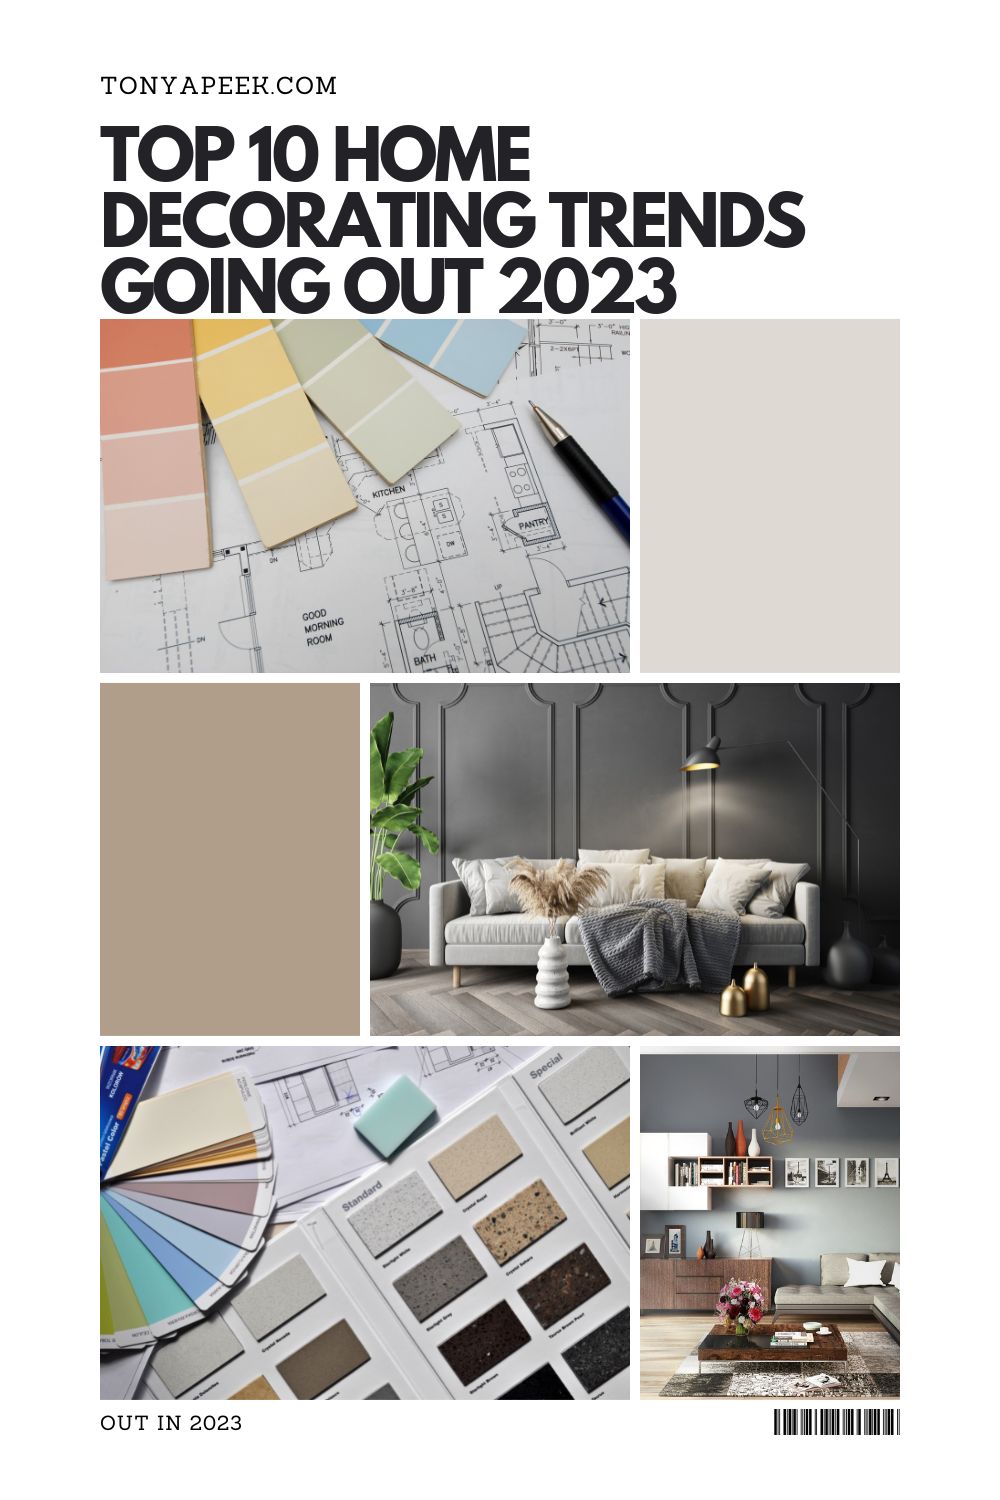 Top 10 Home Decorating Trends Going Out 2023